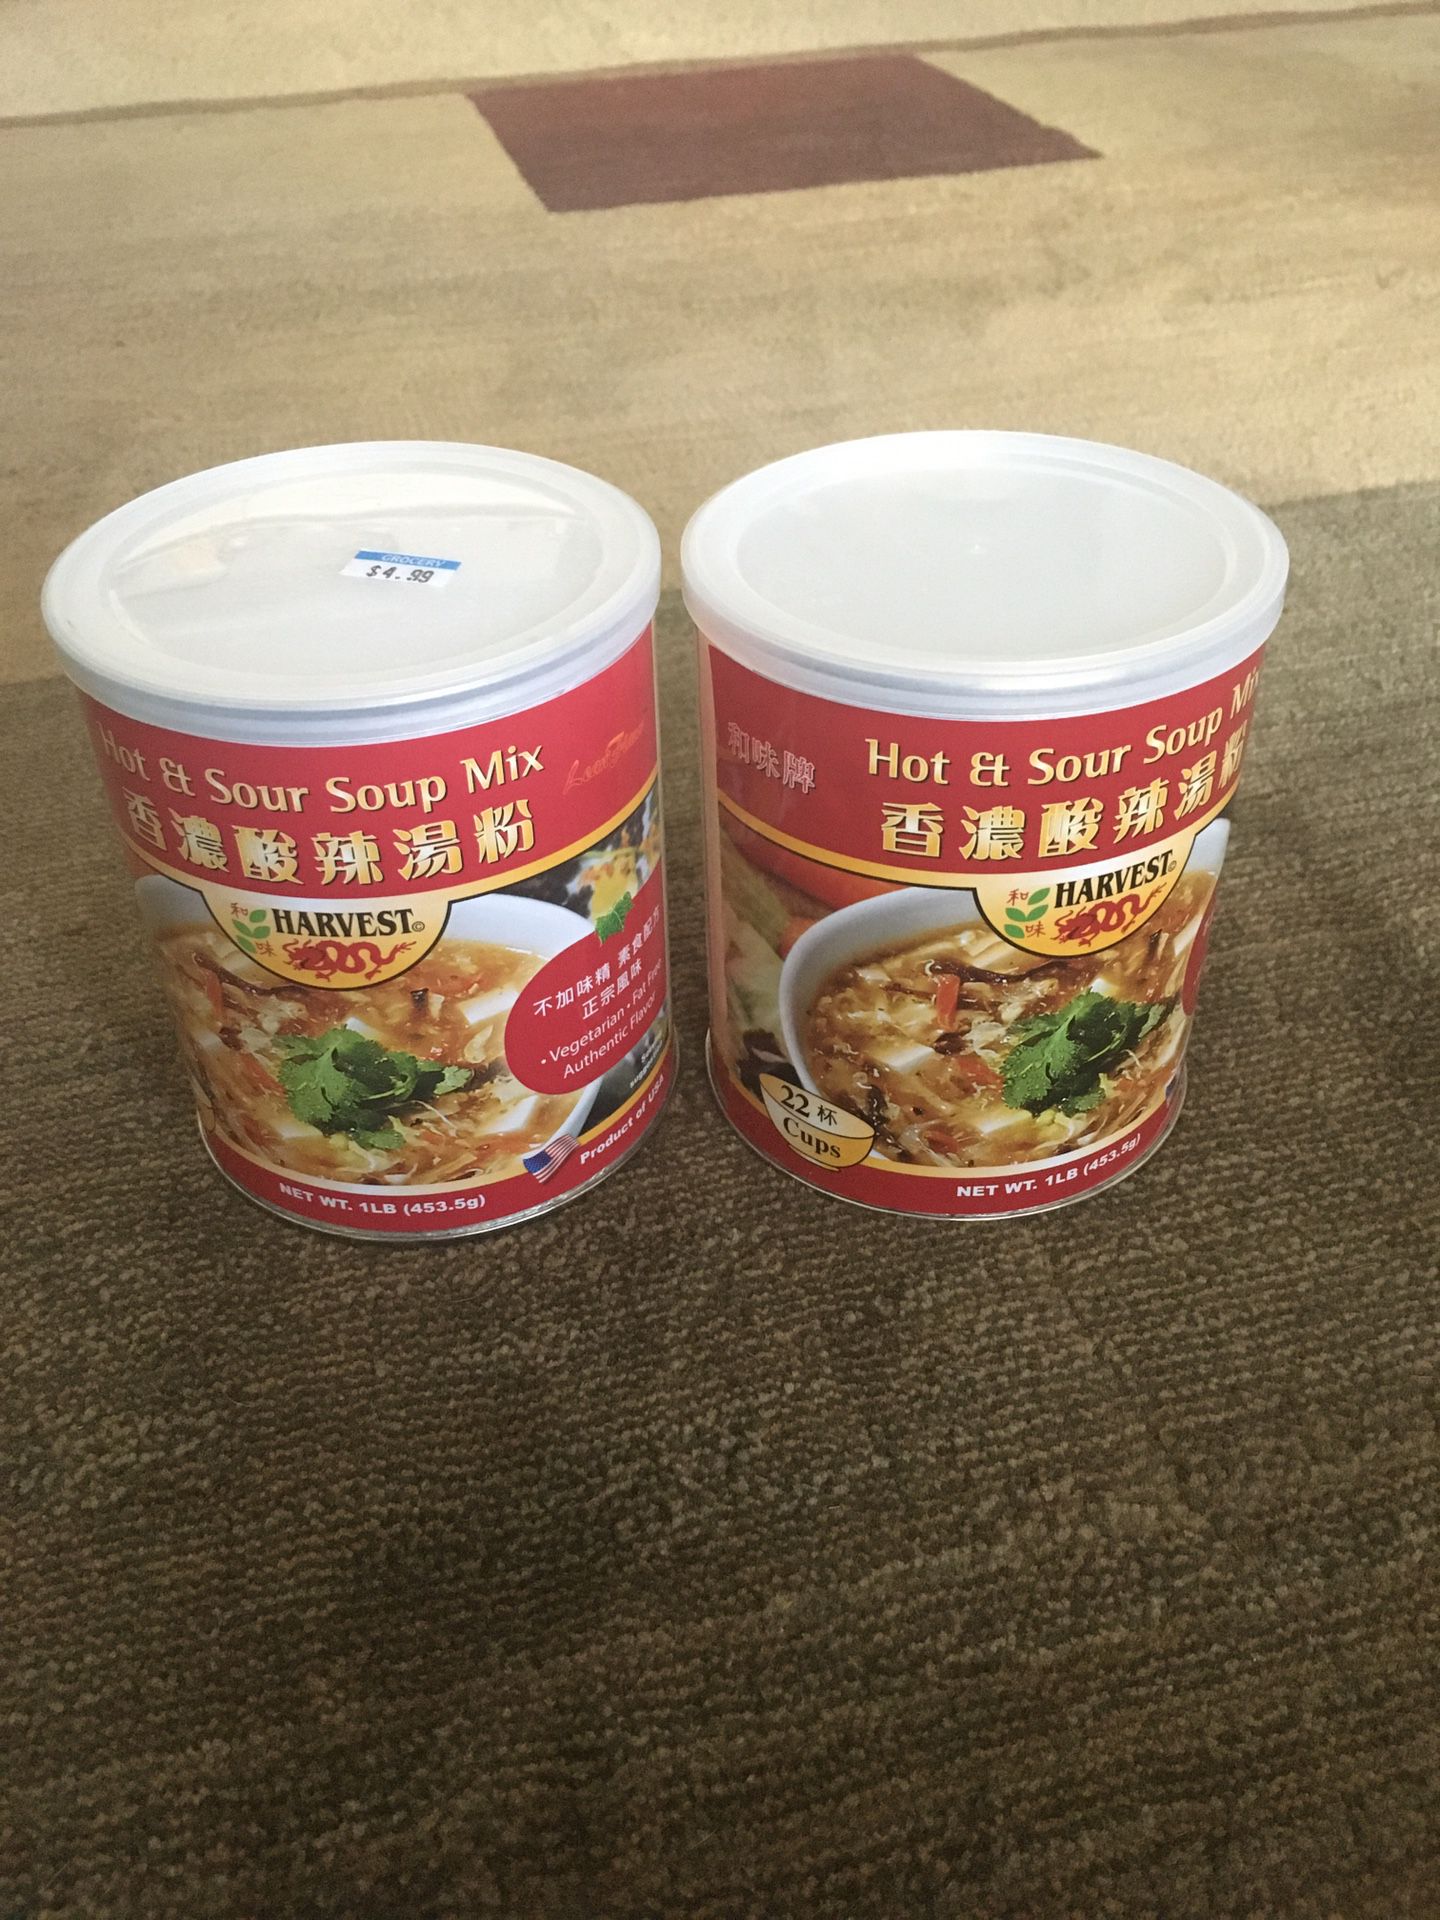 2 cans of Hot and sour soup